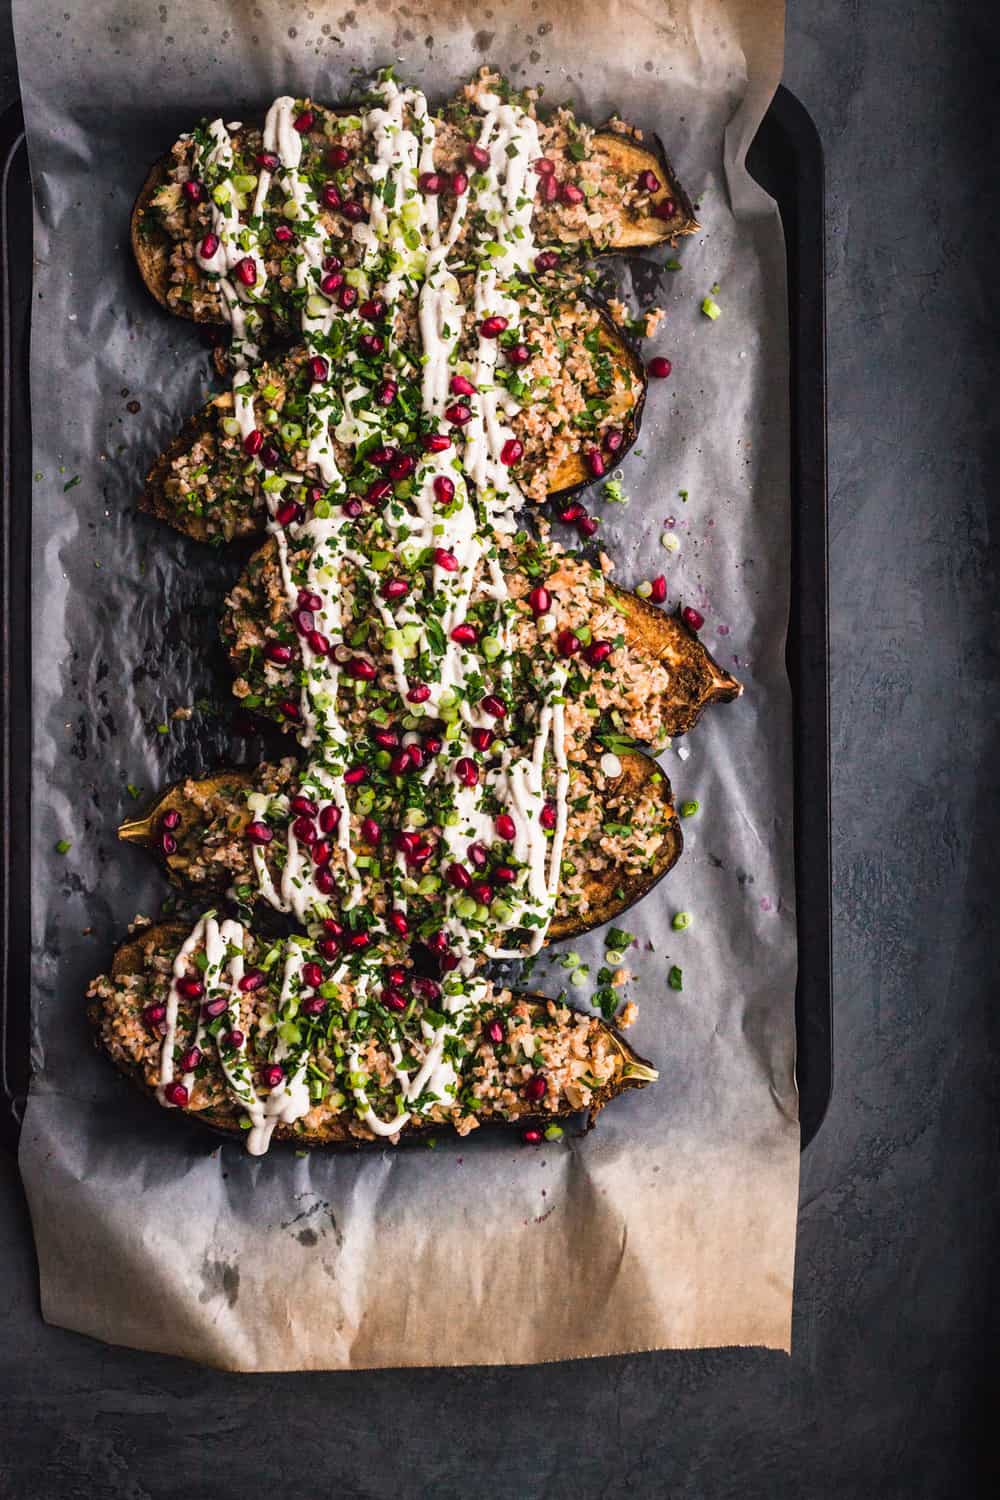 Bulgar Stuffed Eggplant with fresh herbs, tahini drizzle and pomegranate seeds all done and ready to be eaten.